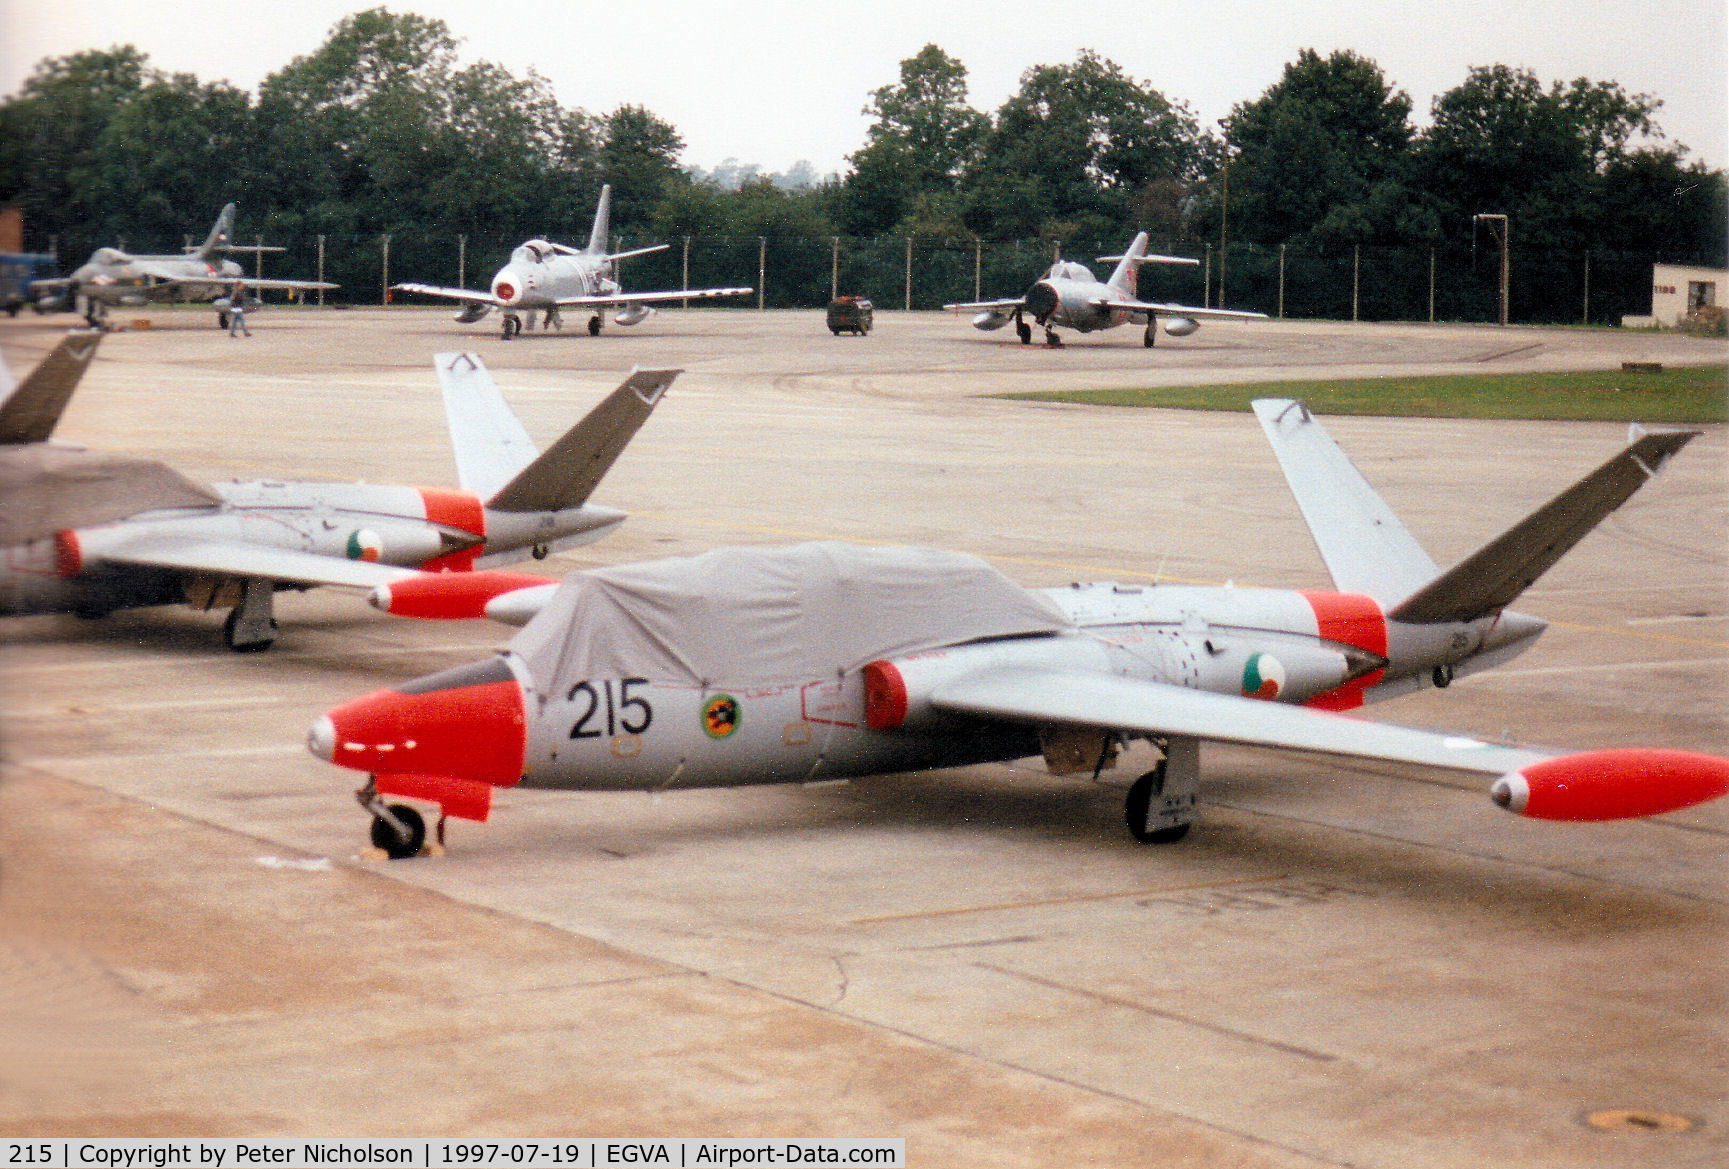 215, Fouga CM-170R Magister C/N 357, Super Magister, callsign Irish Fox, of the Irish Air Corps Silver Swallows display team on the flight-line at the 1997 Intnl Air Tattoo at RAF Fairford.